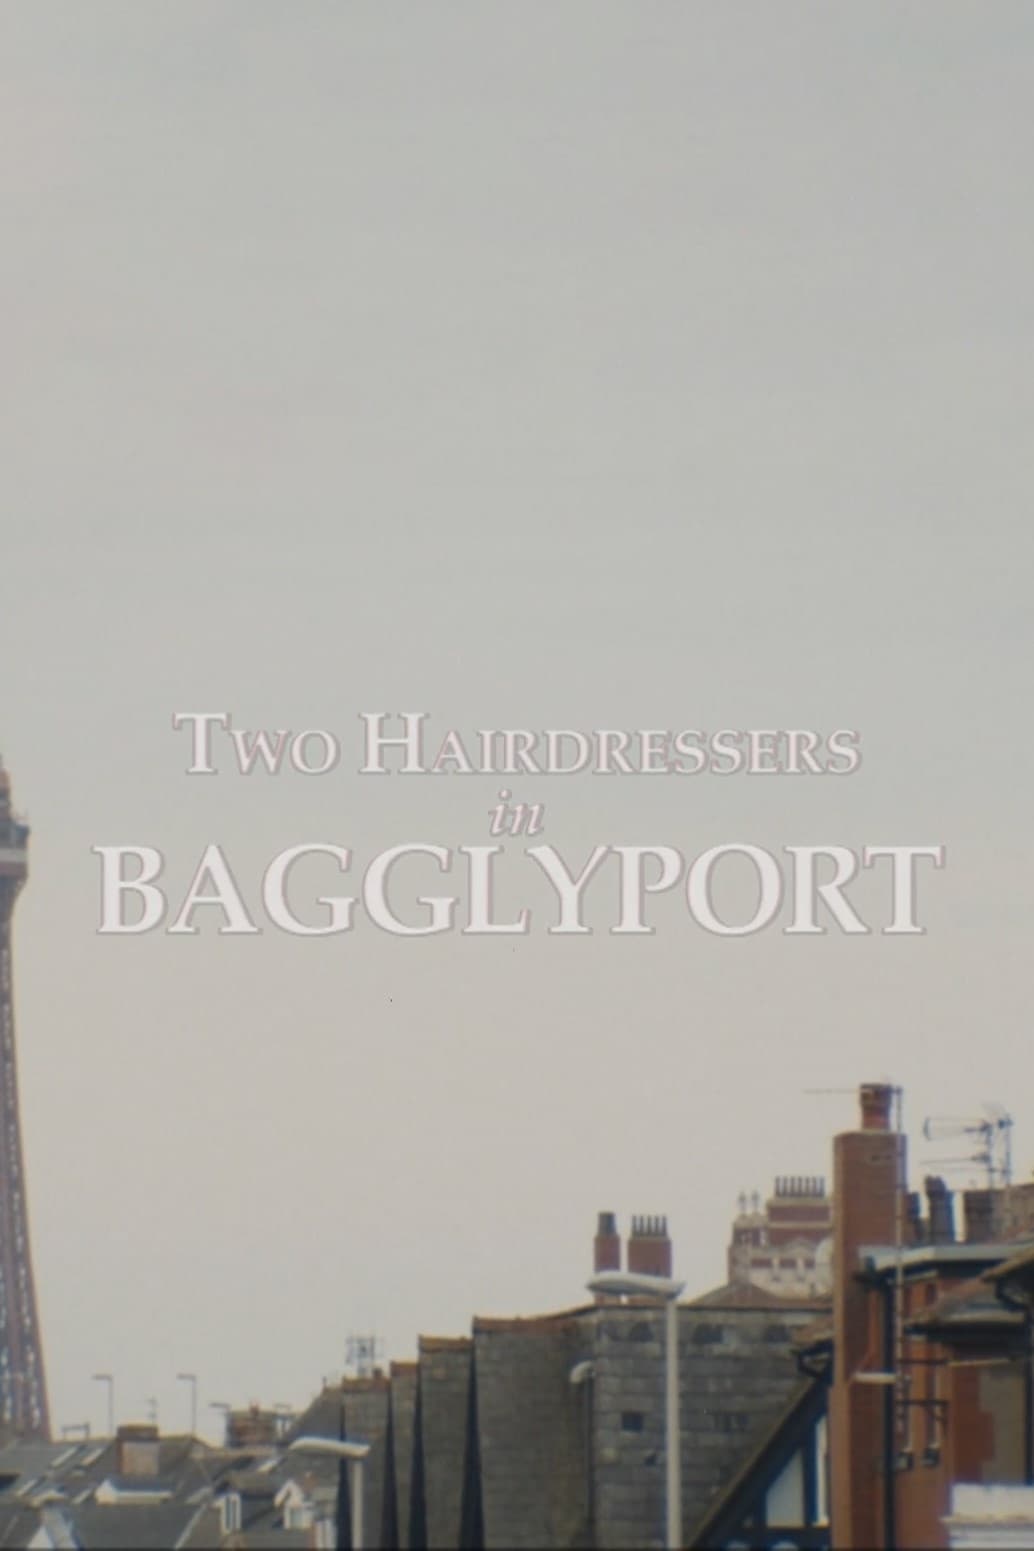 Two Hairdressers in Bagglyport